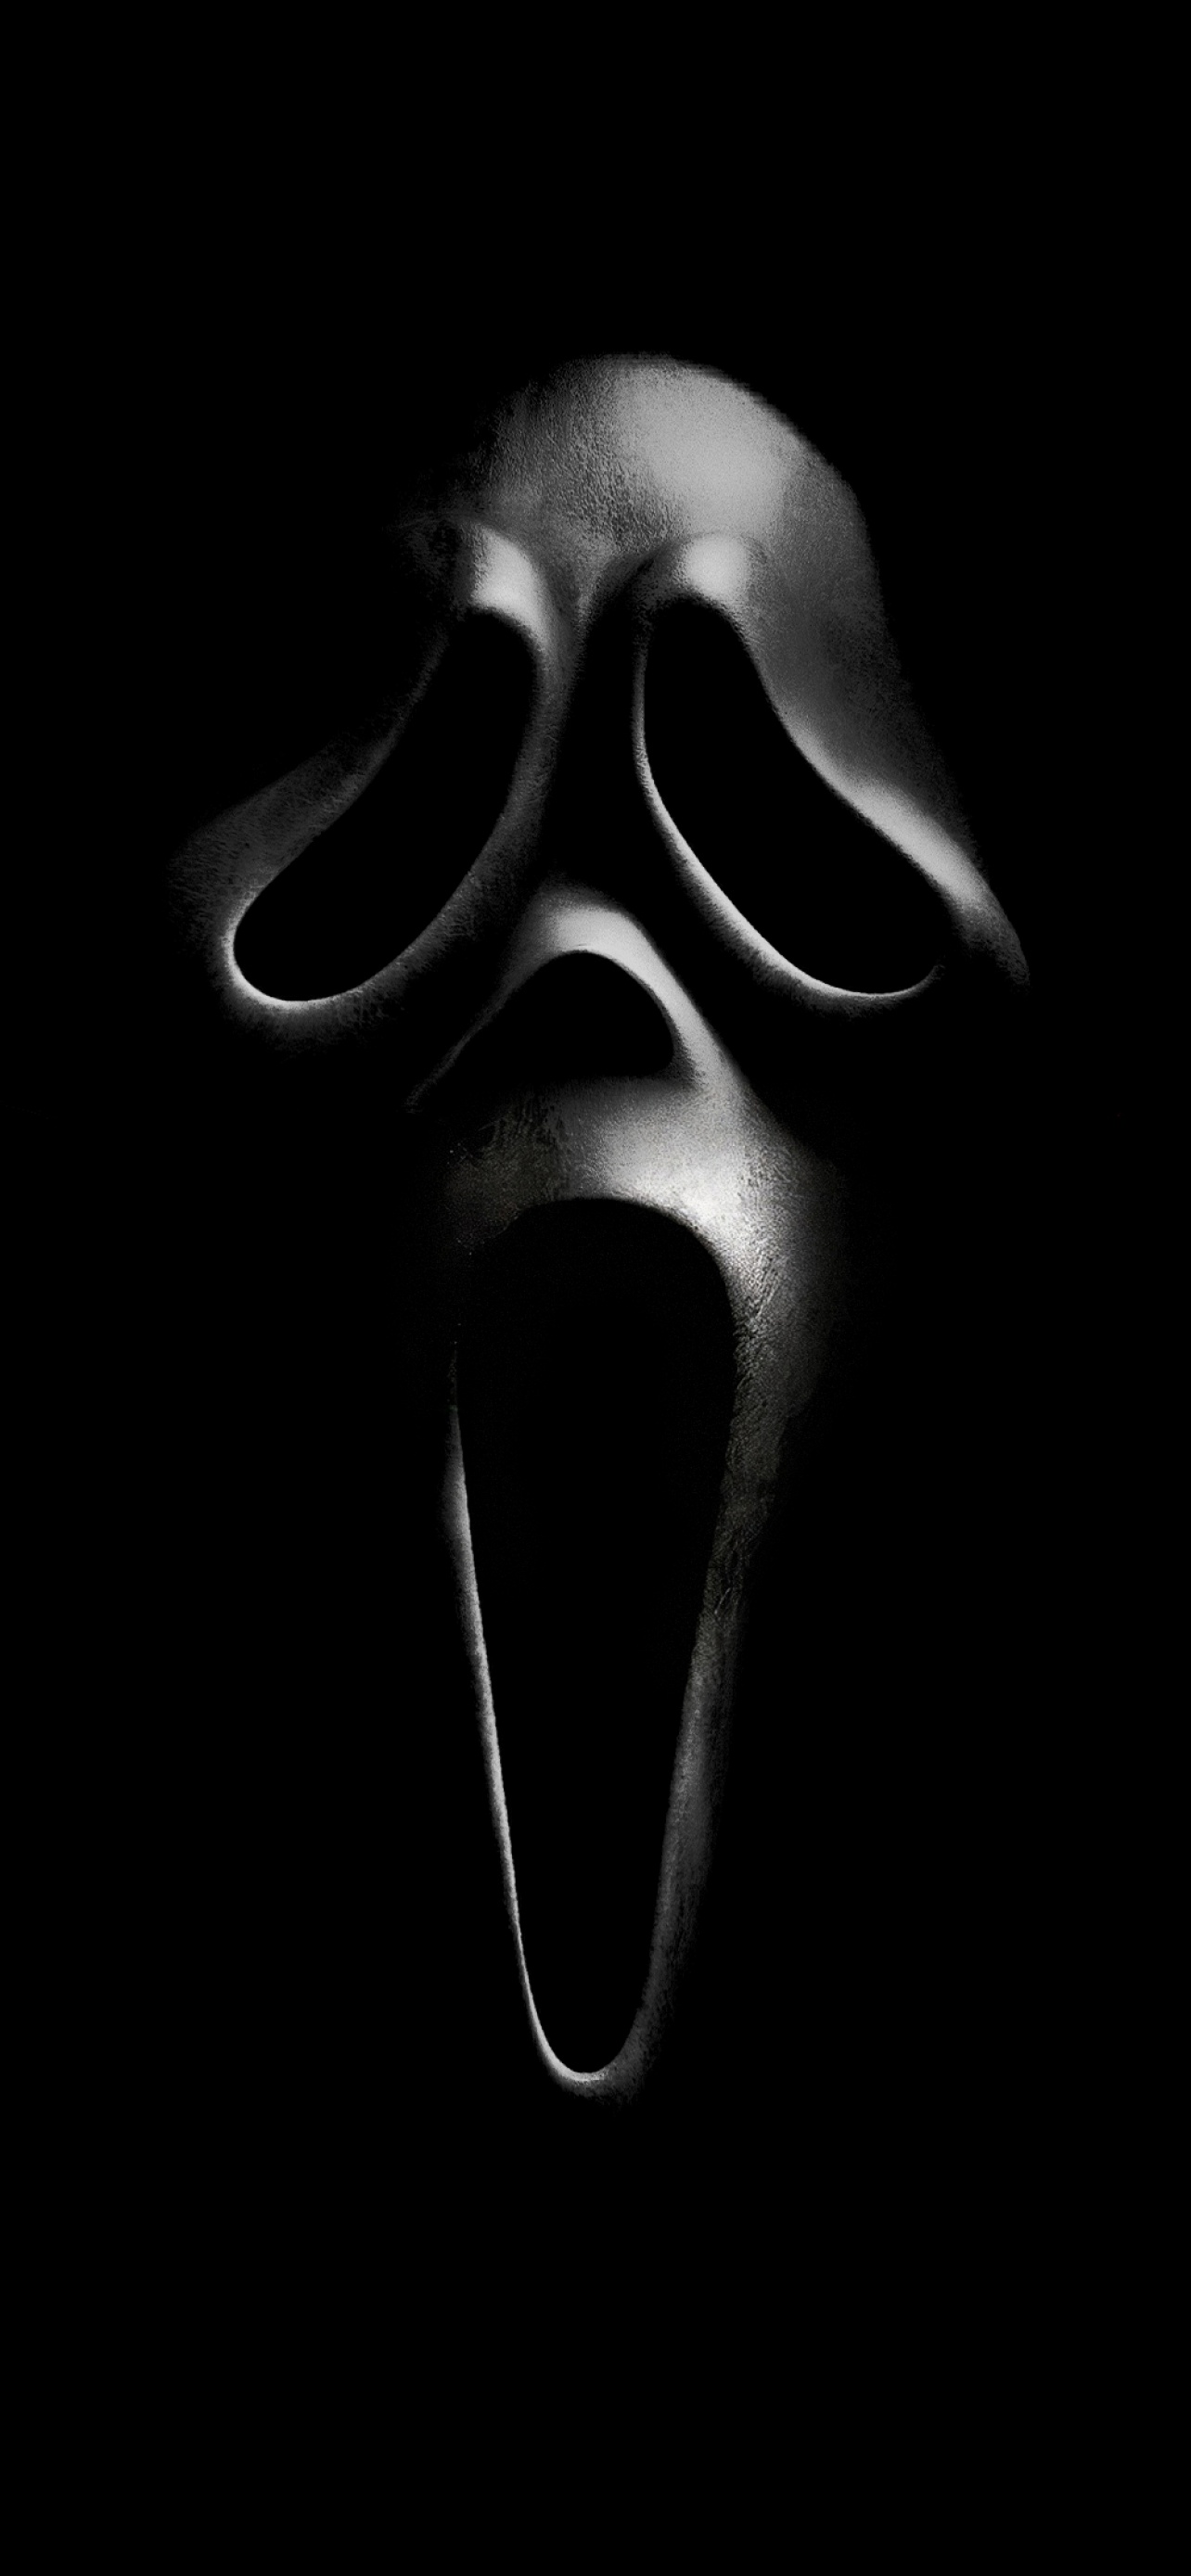 slashers   Horror movie icons Ghostface Ghost face wallpaper aesthetic